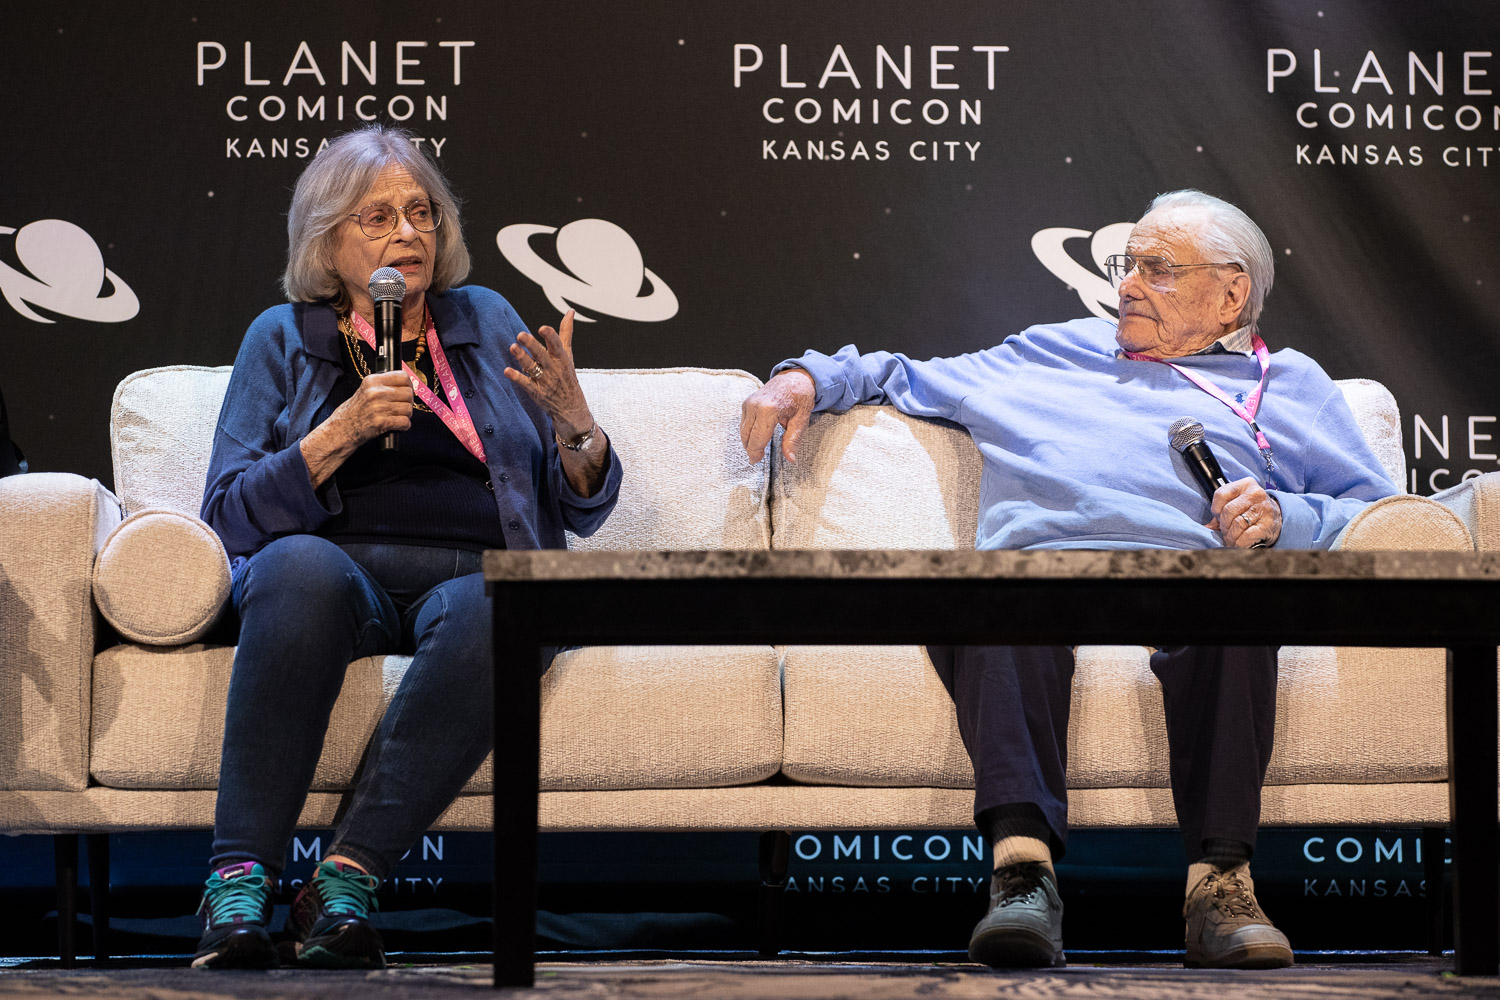 Bonnie Bartlett and William Daniels during a panel on Friday at the 2023 Planet Comicon in Kansas City, Missouri on March 17, 2023.